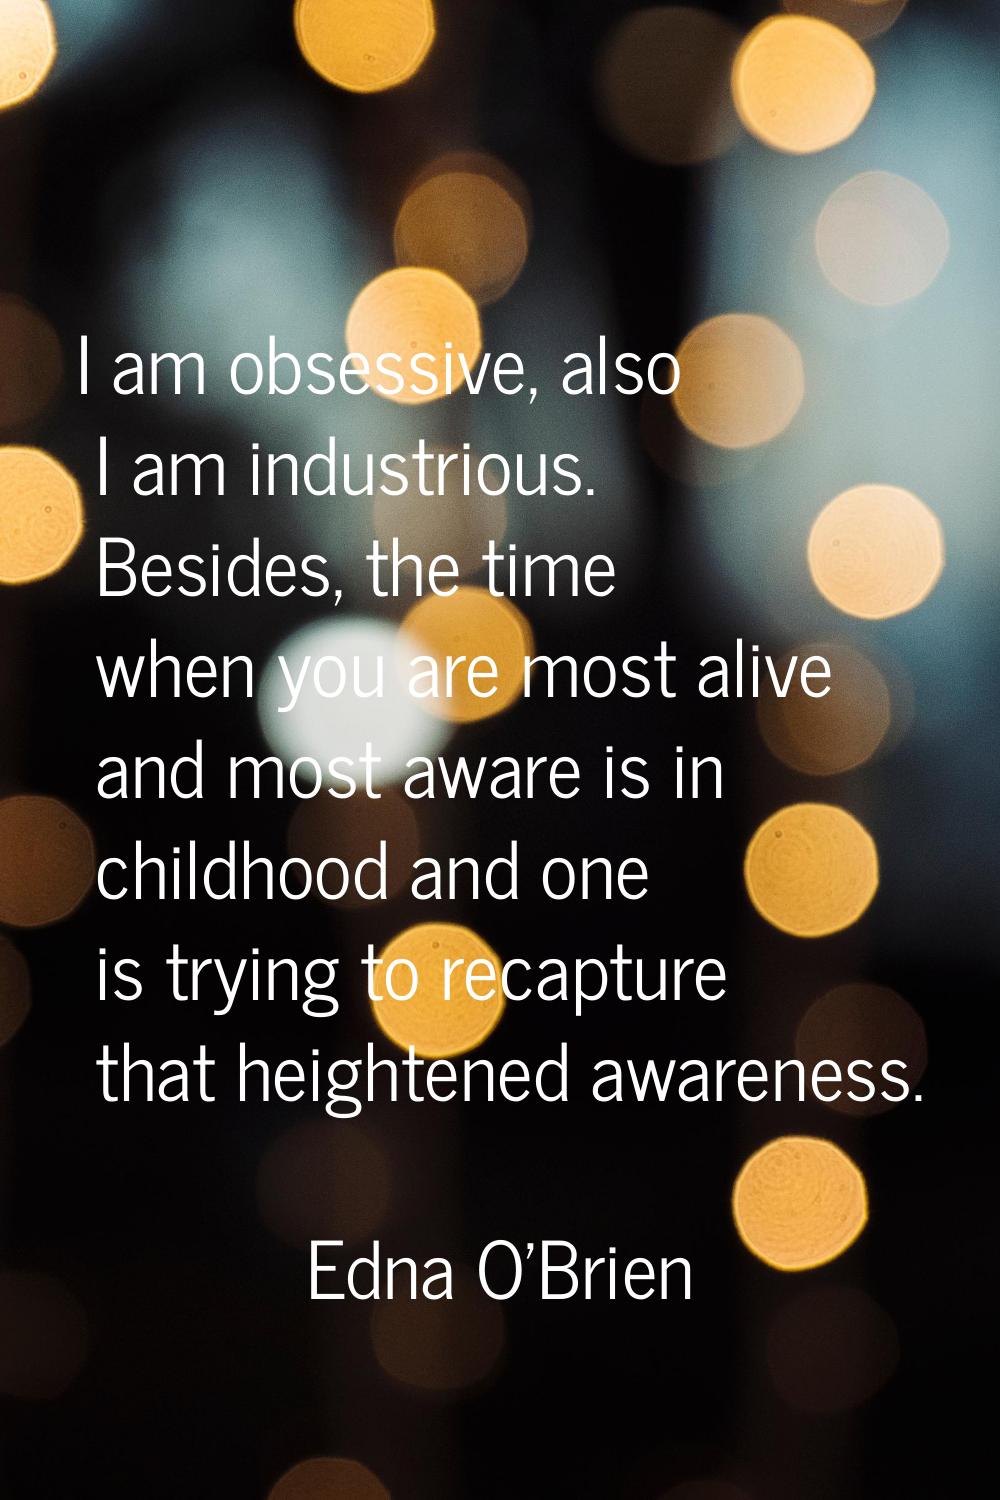 I am obsessive, also I am industrious. Besides, the time when you are most alive and most aware is 